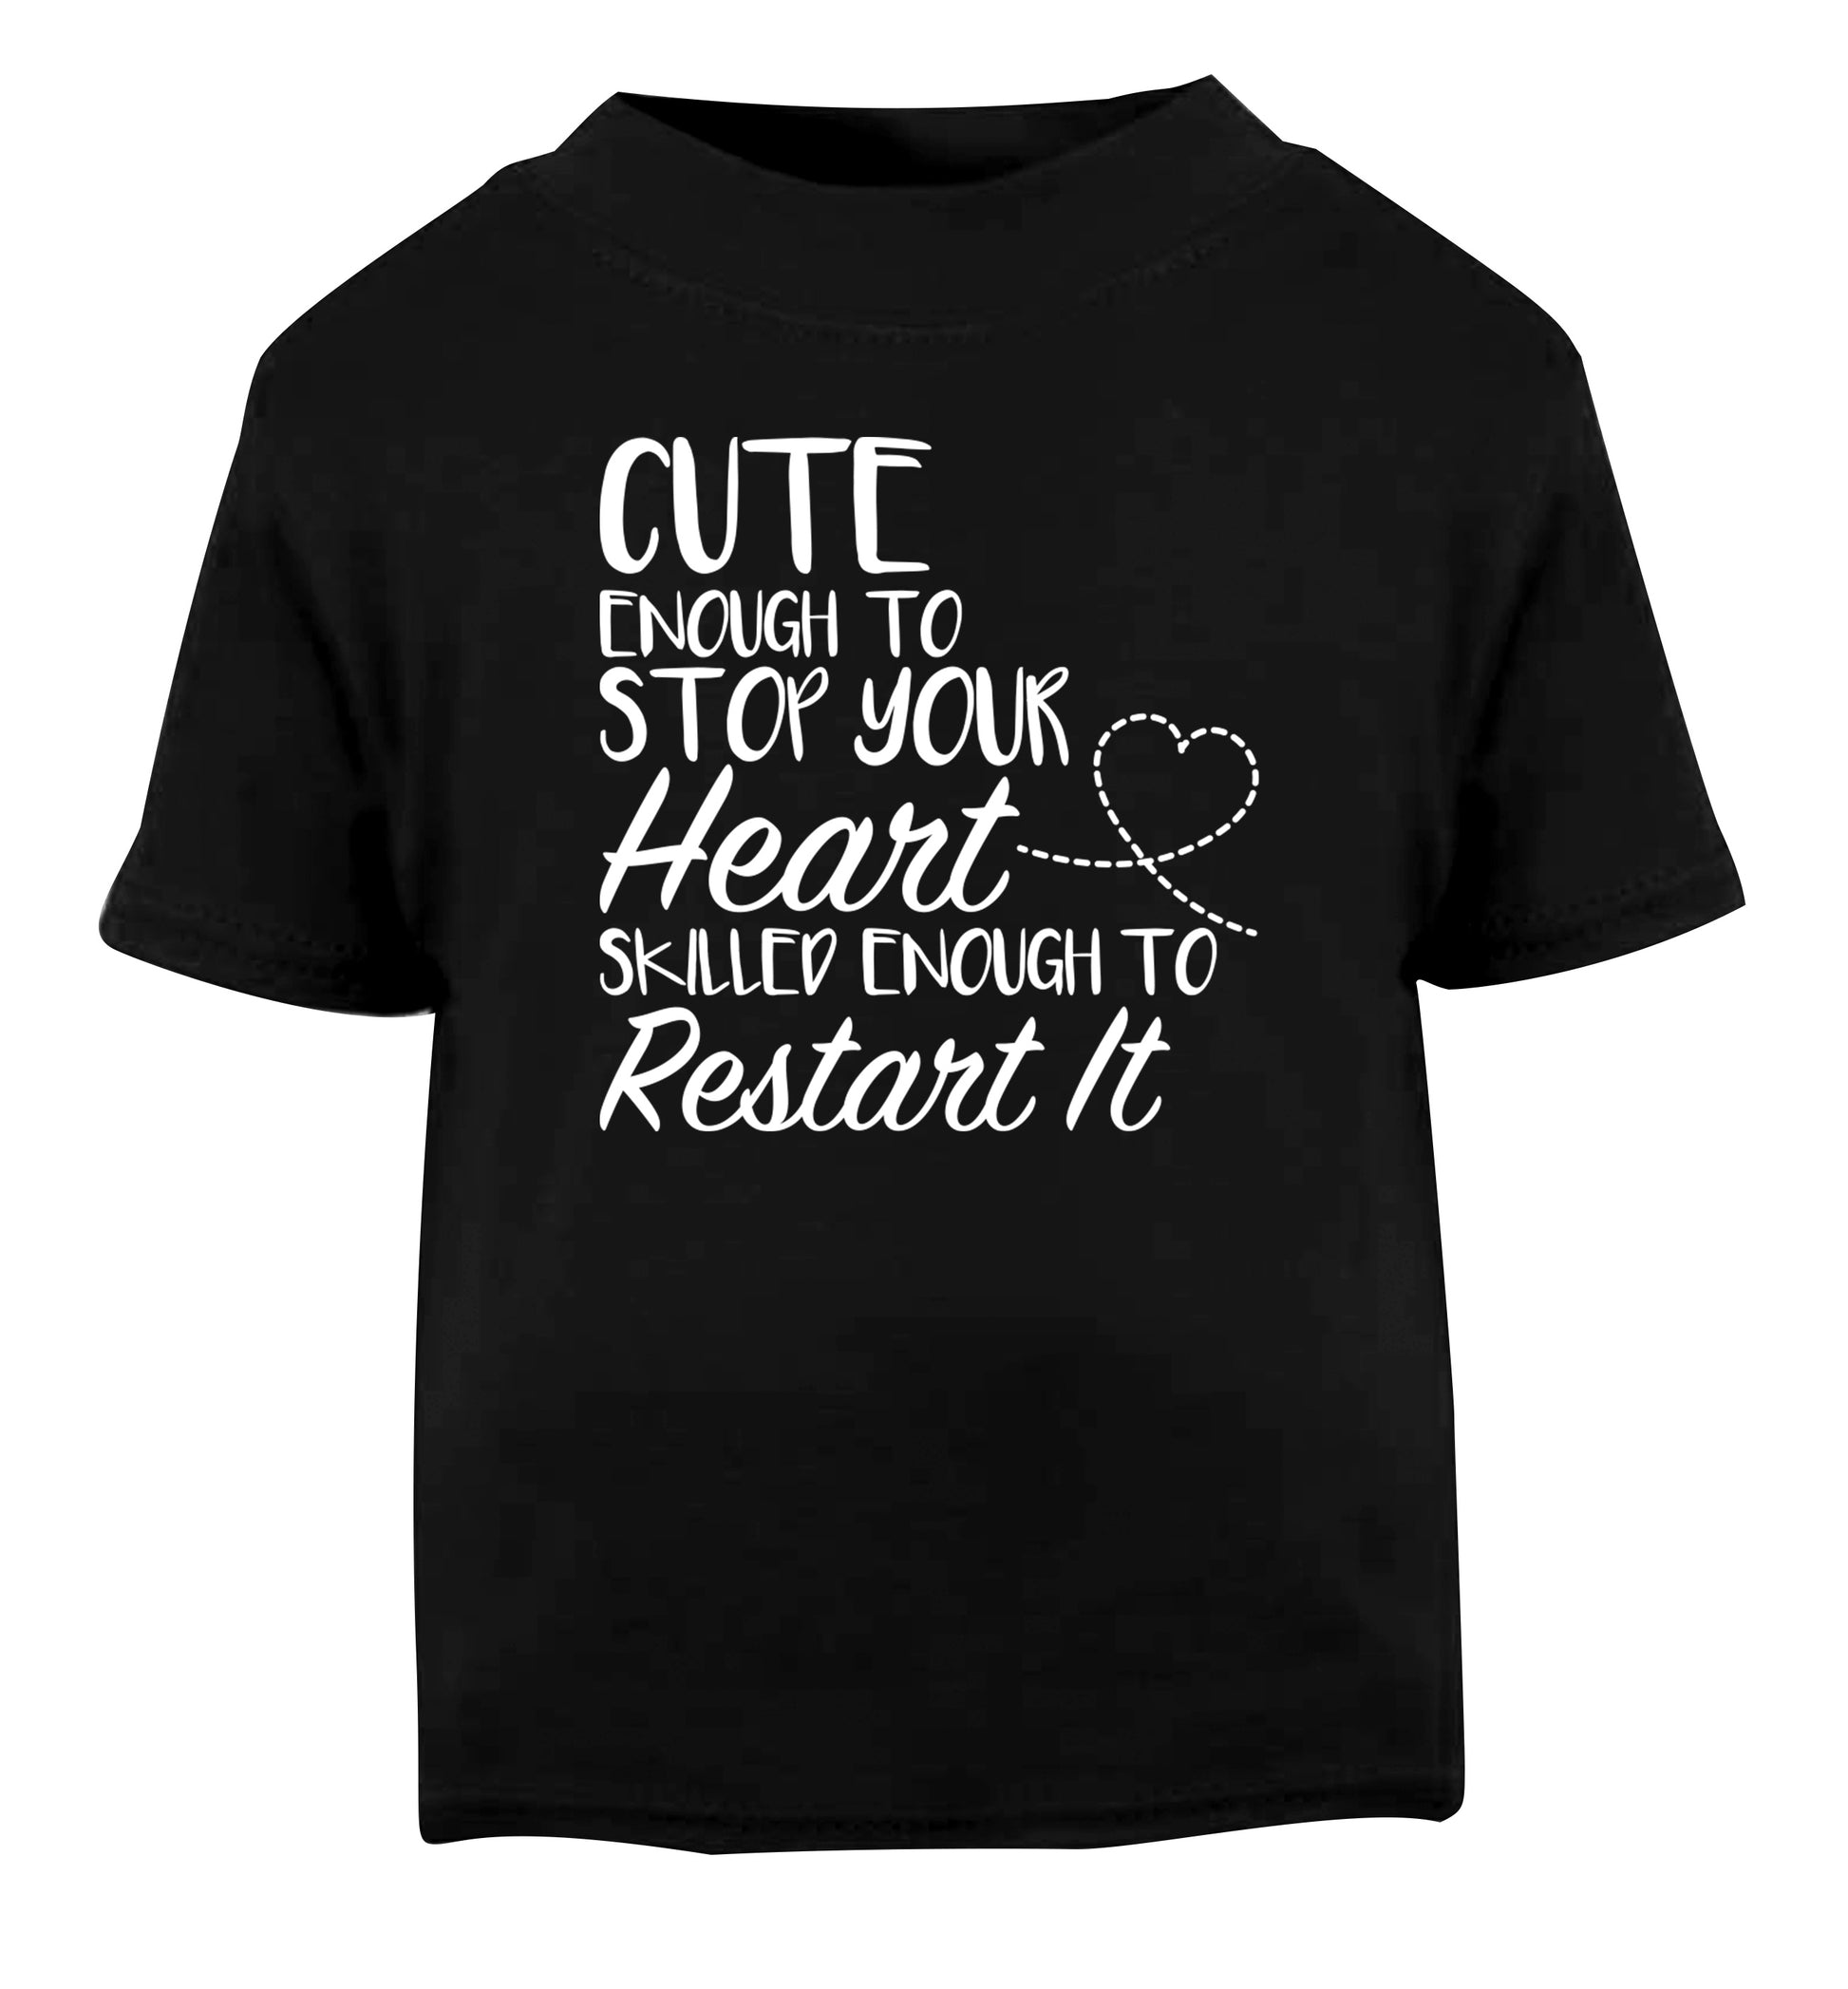 Cute enough to stop your heart skilled enough to restart it Black Baby Toddler Tshirt 2 years